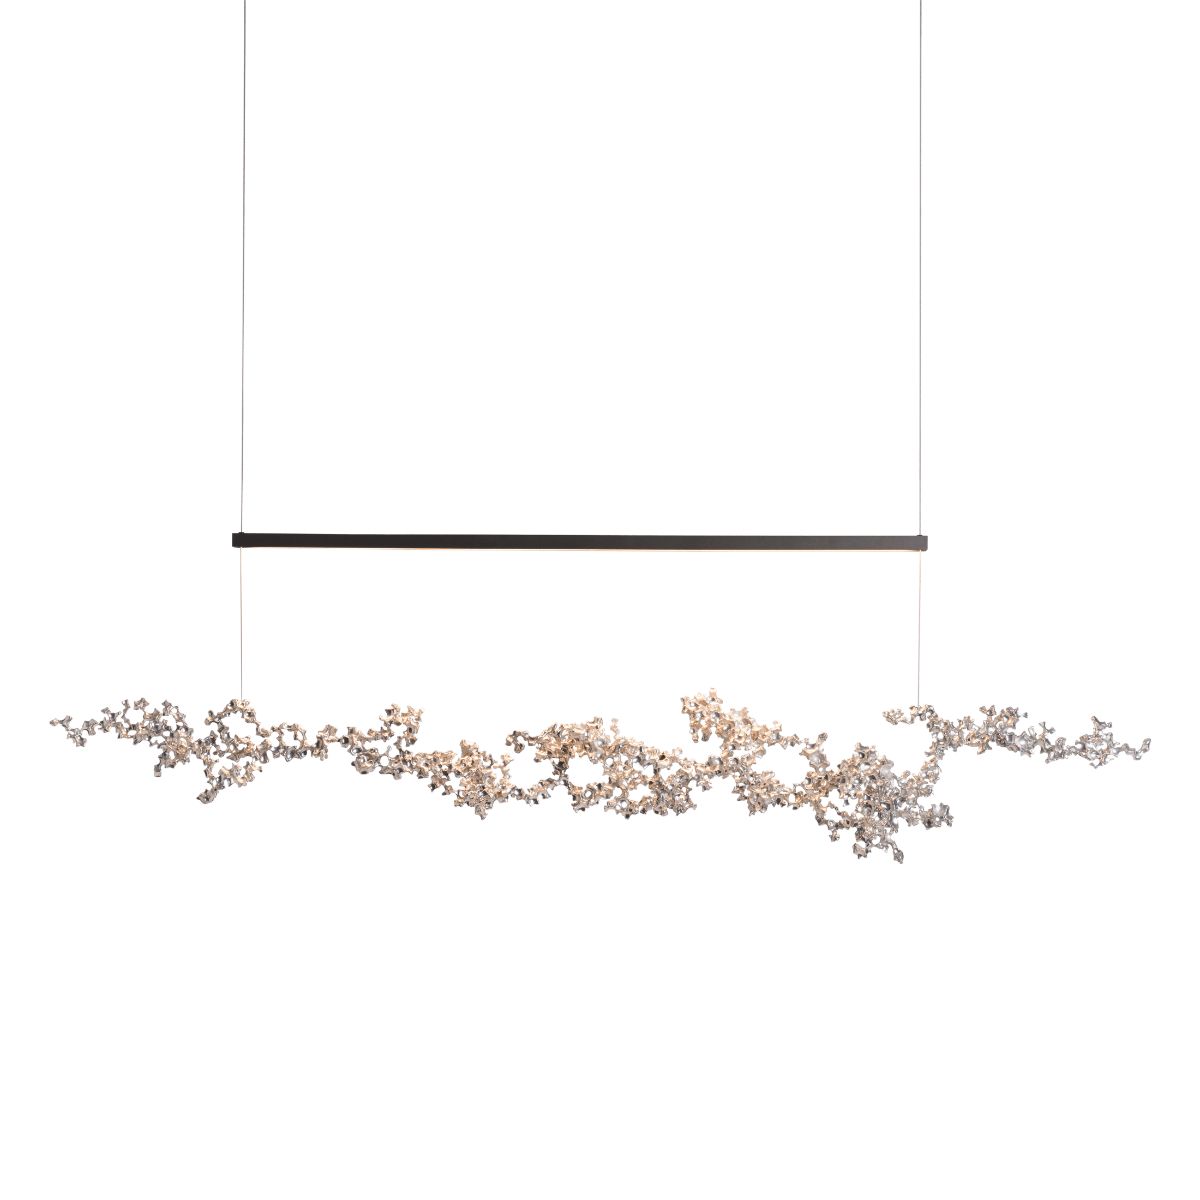 Coral 56 in. LED Linear Pendant Light Sterling finish